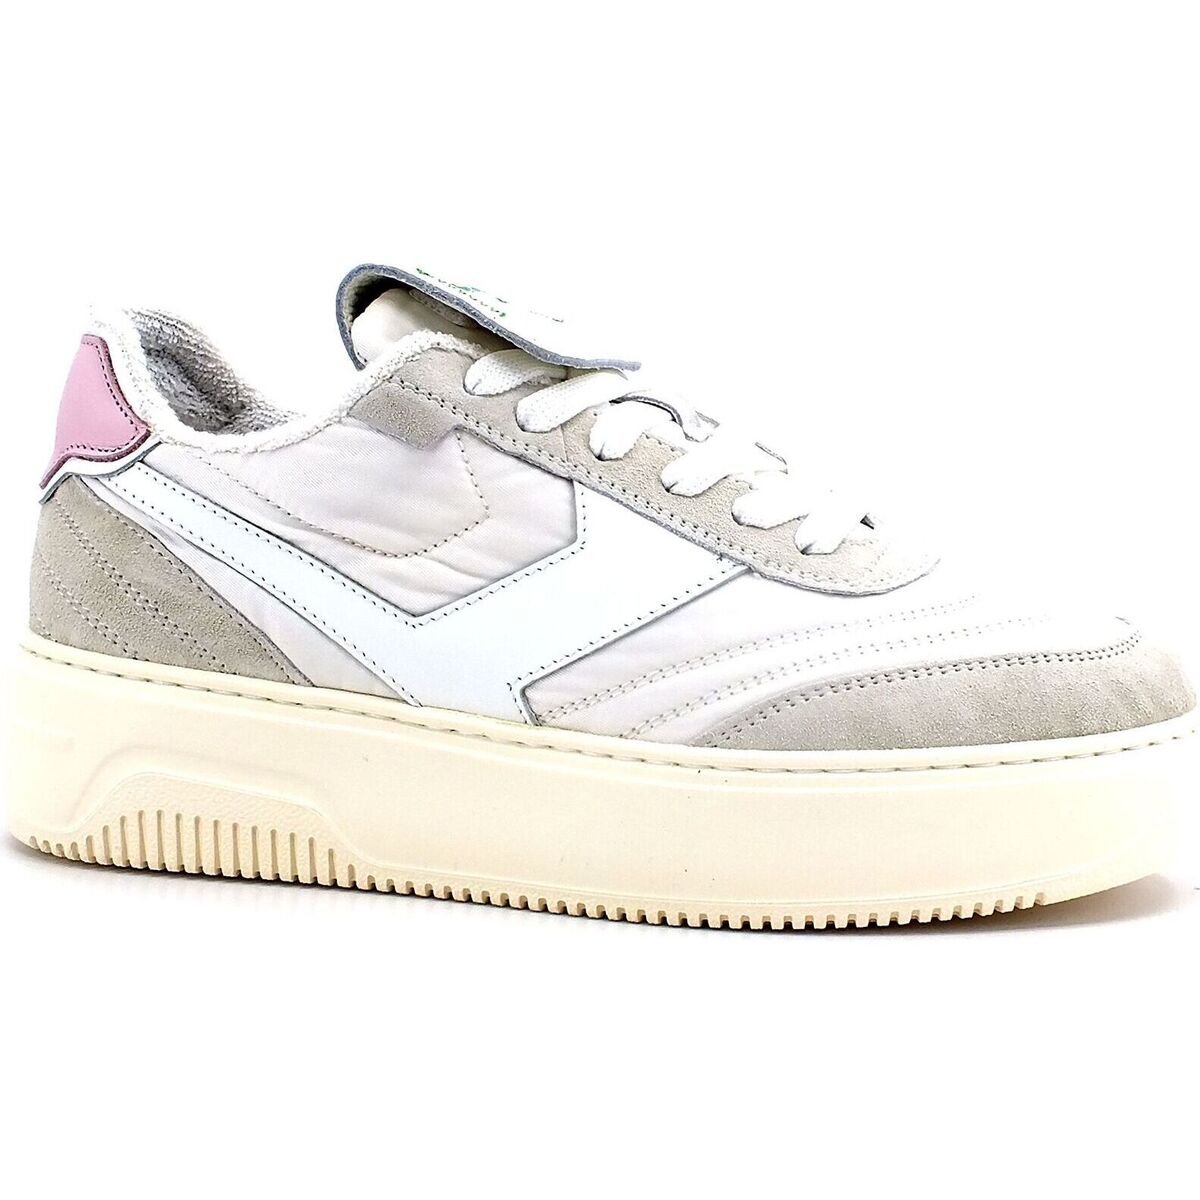 Chaussures Femme Bottes Pantofola d'Oro Room Sneaker Donna Bianco Grigio Rosa PDL2WD Blanc